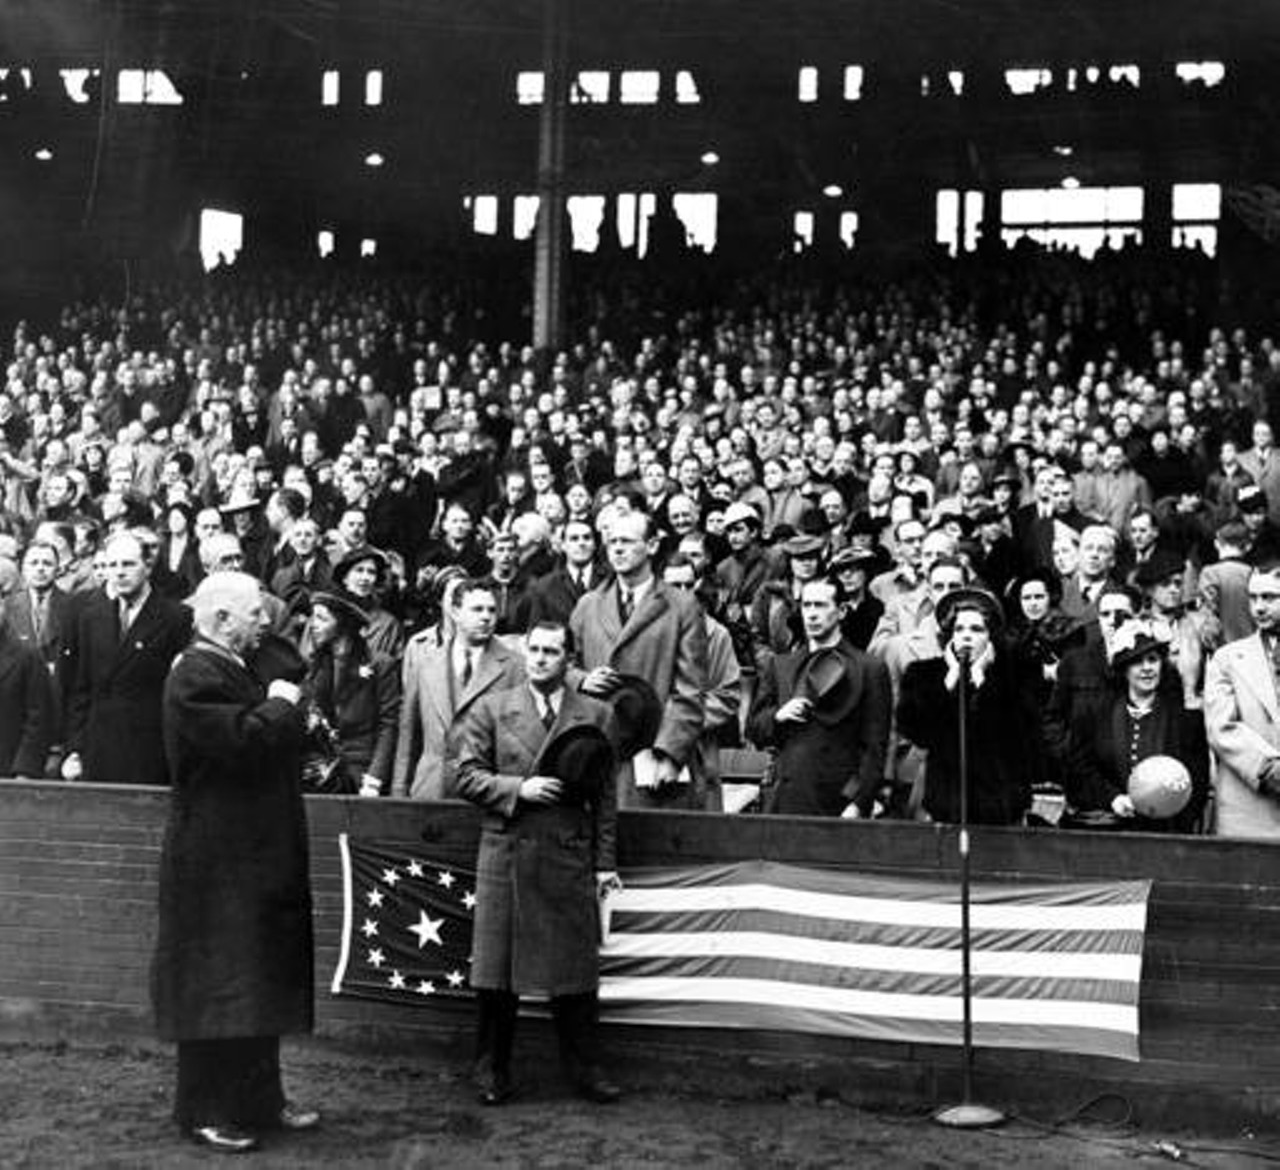 A young Judy Garland sings the national anthem at the Cleveland Indians home opener, April 21, 1939.